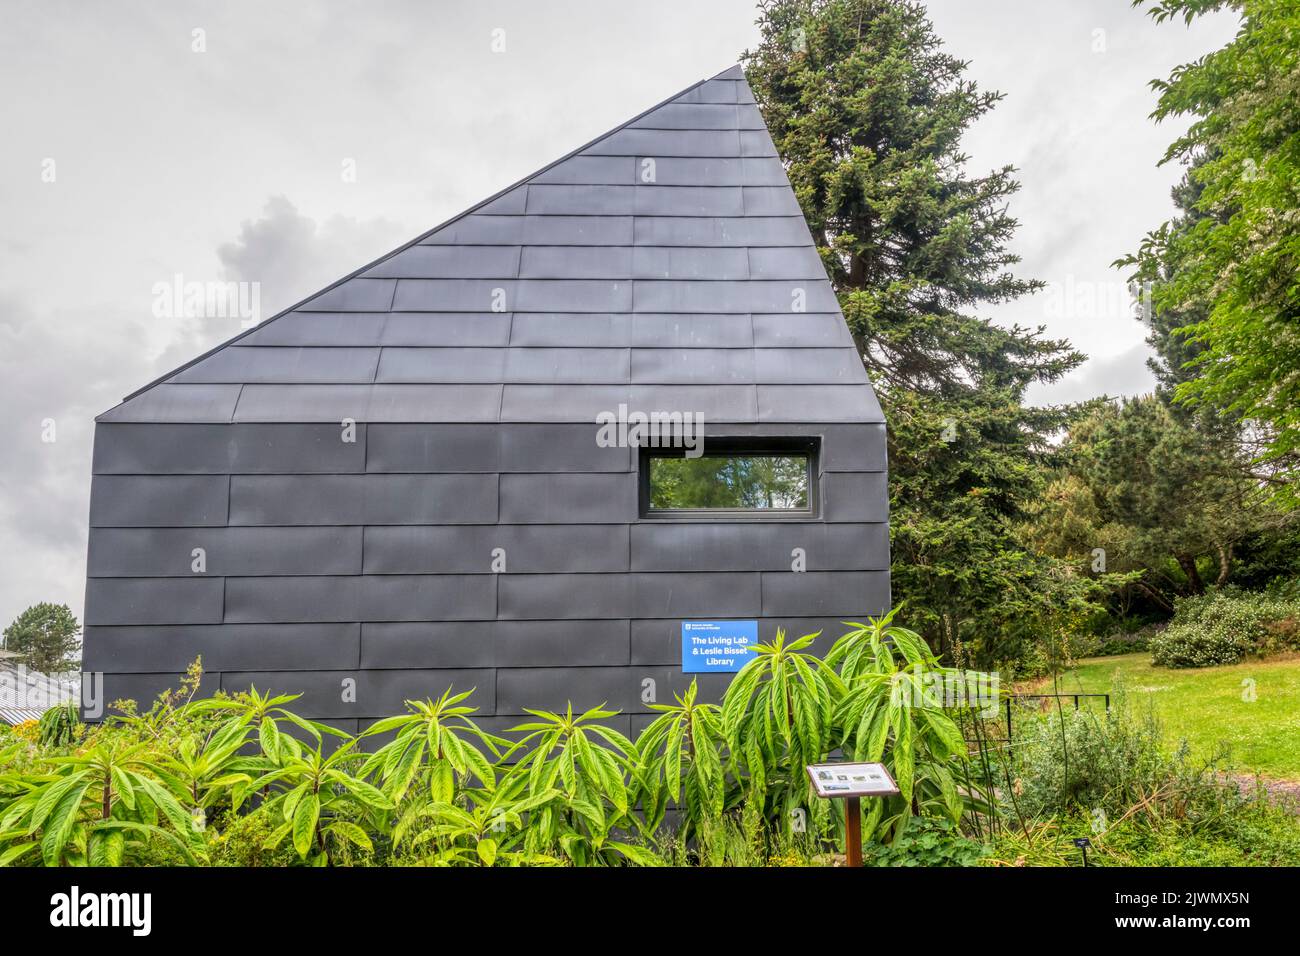 The Macro Micro Studio at the University of Dundee Botanic Gardens is an off-grid building built to Passivhaus standards as a demonstration unit. Stock Photo